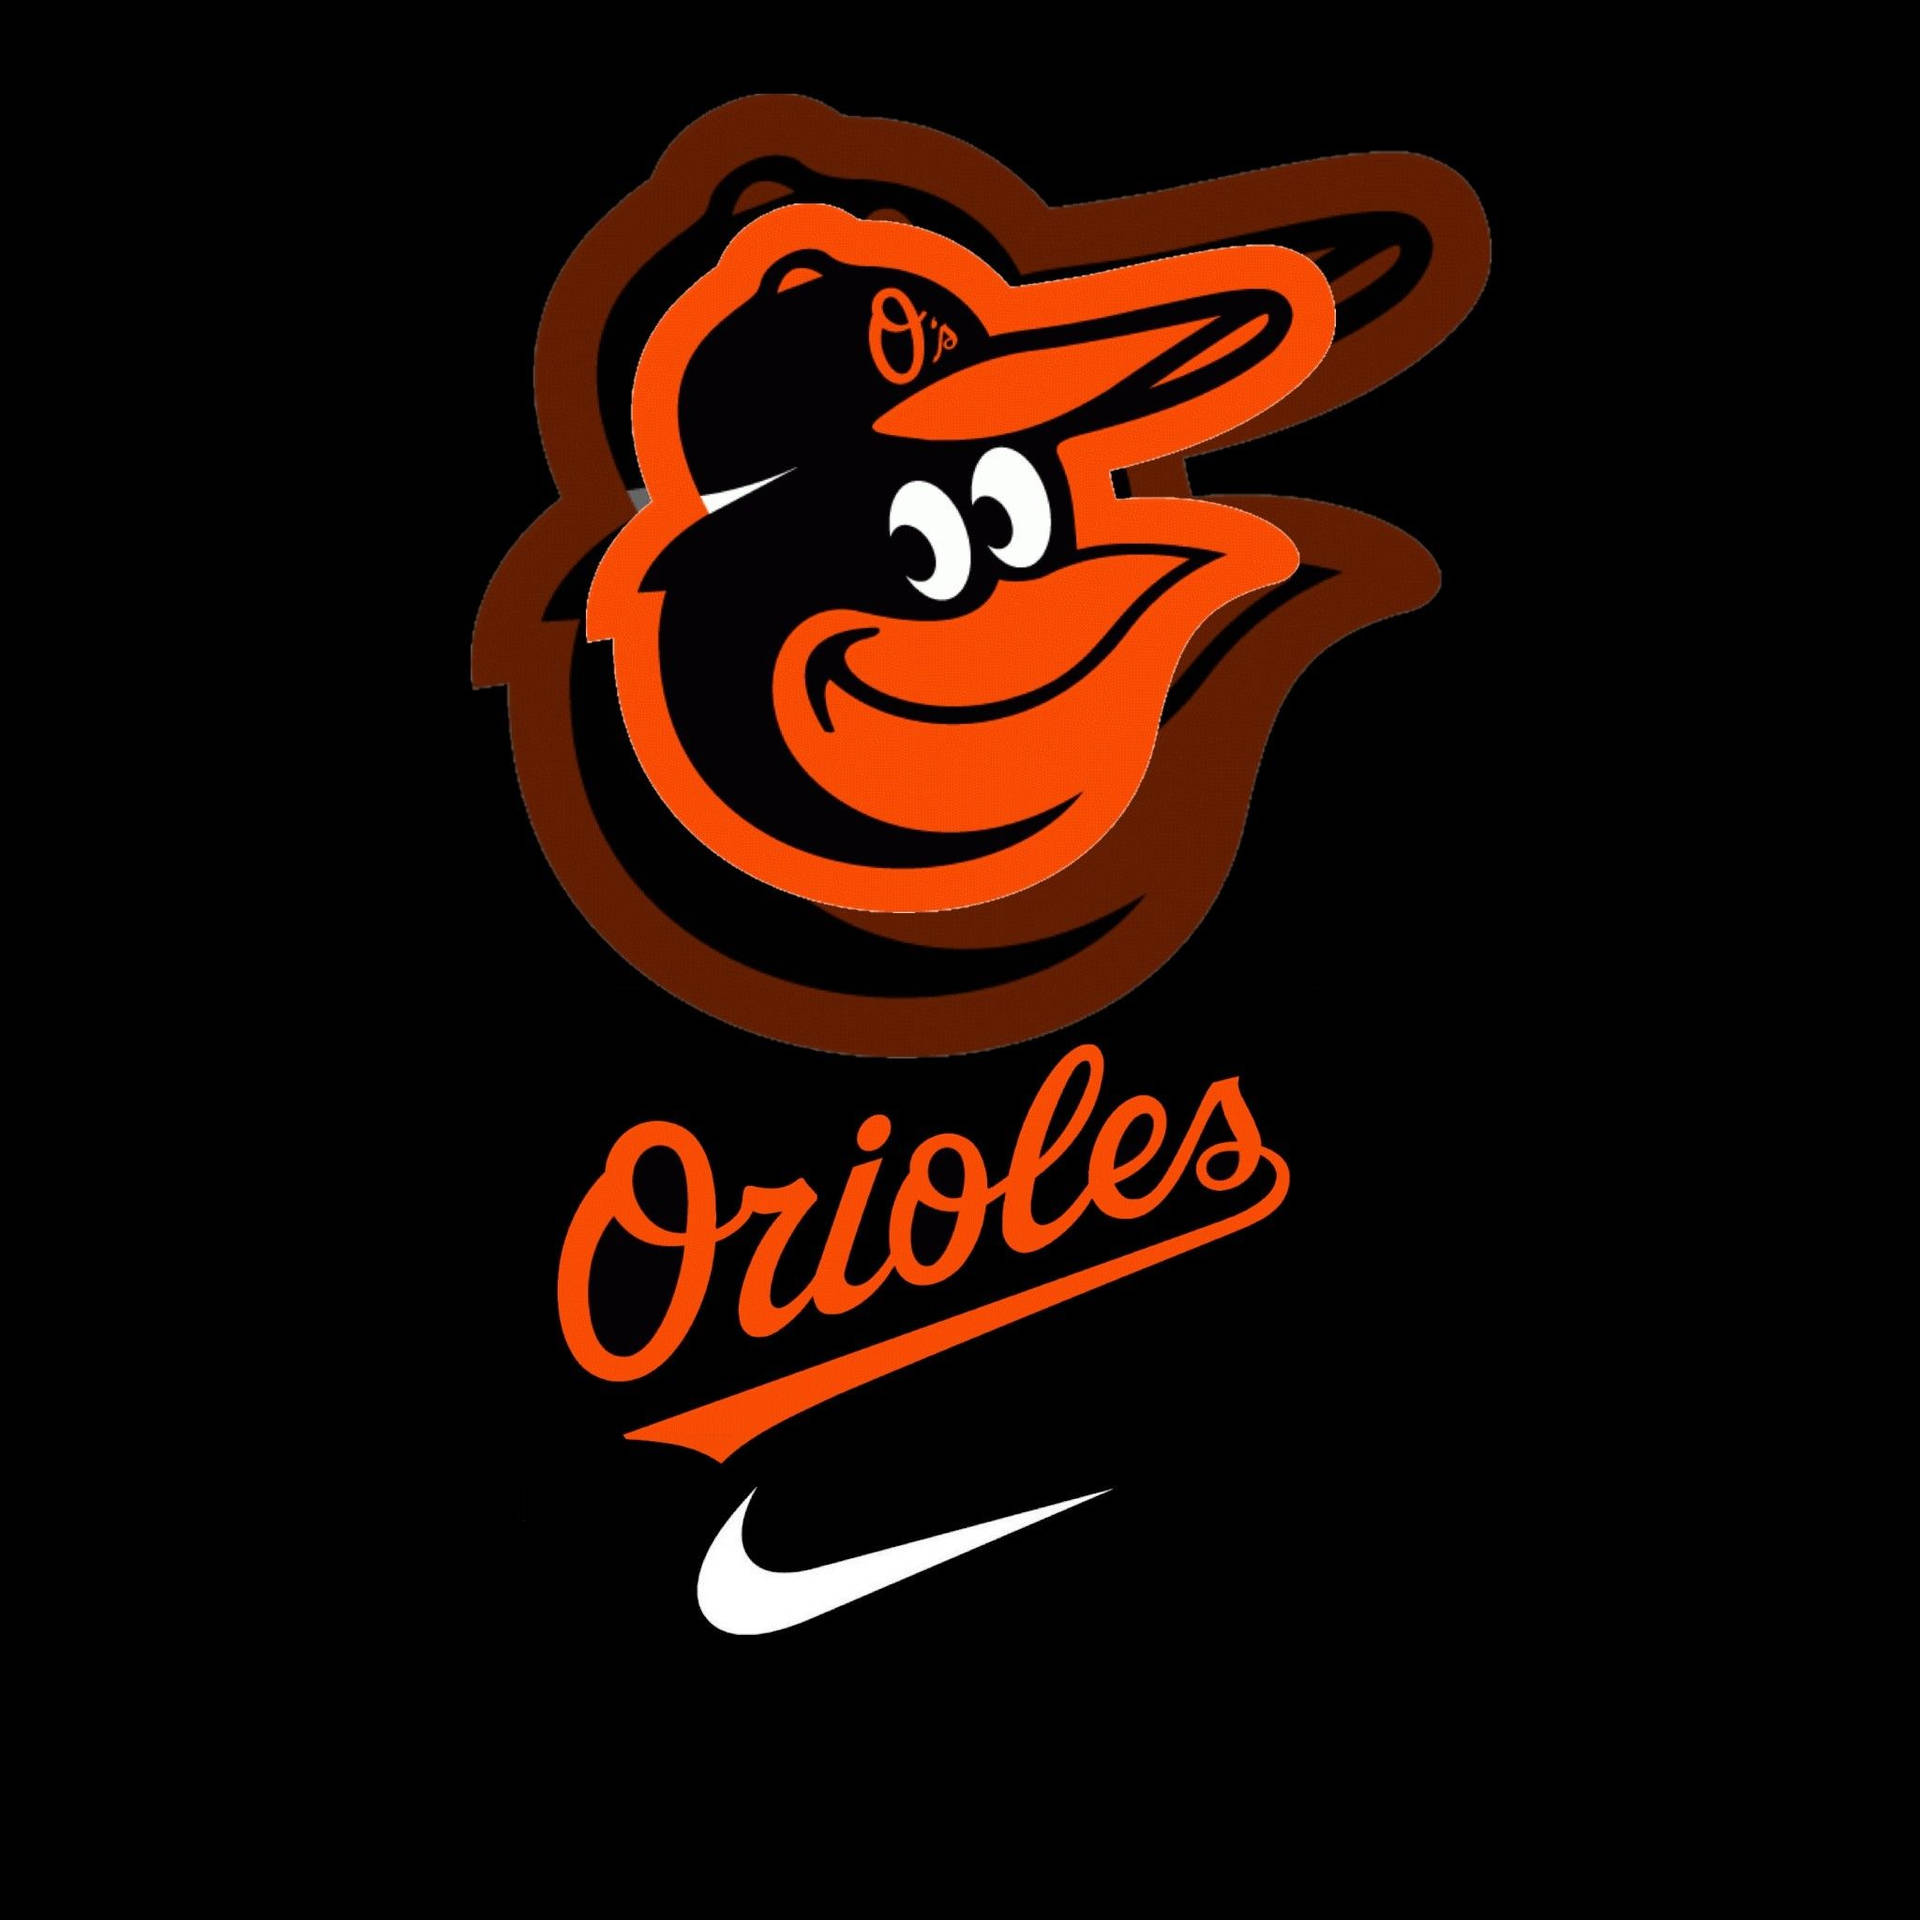 100+] Baltimore Orioles Wallpapers